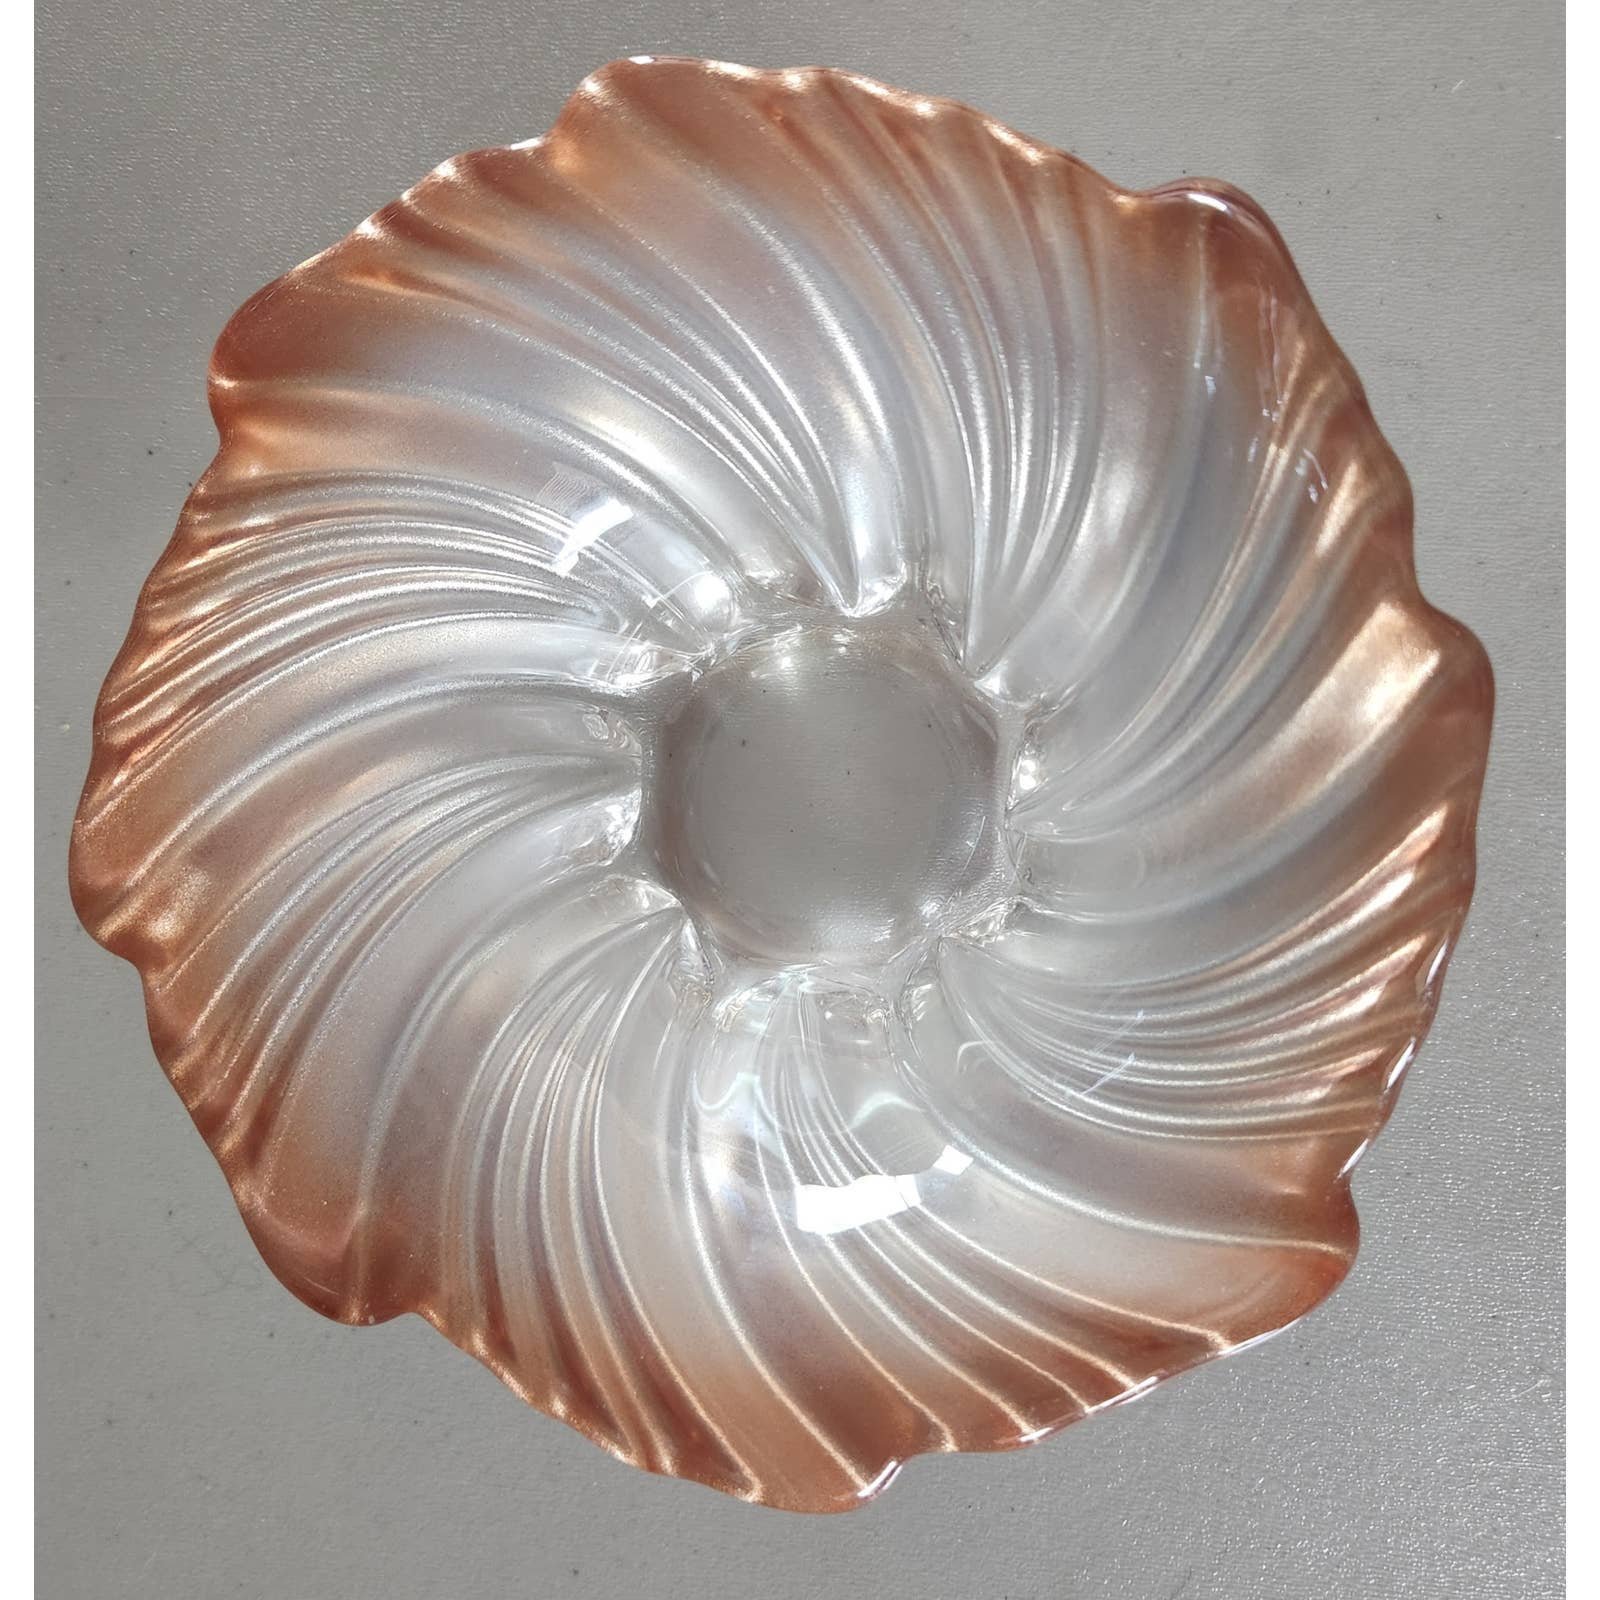 Mikasa Belle Epoque Crystal Swirl Glass Bowl Rose Gold to Gold Ombre PJwx6ZUMb